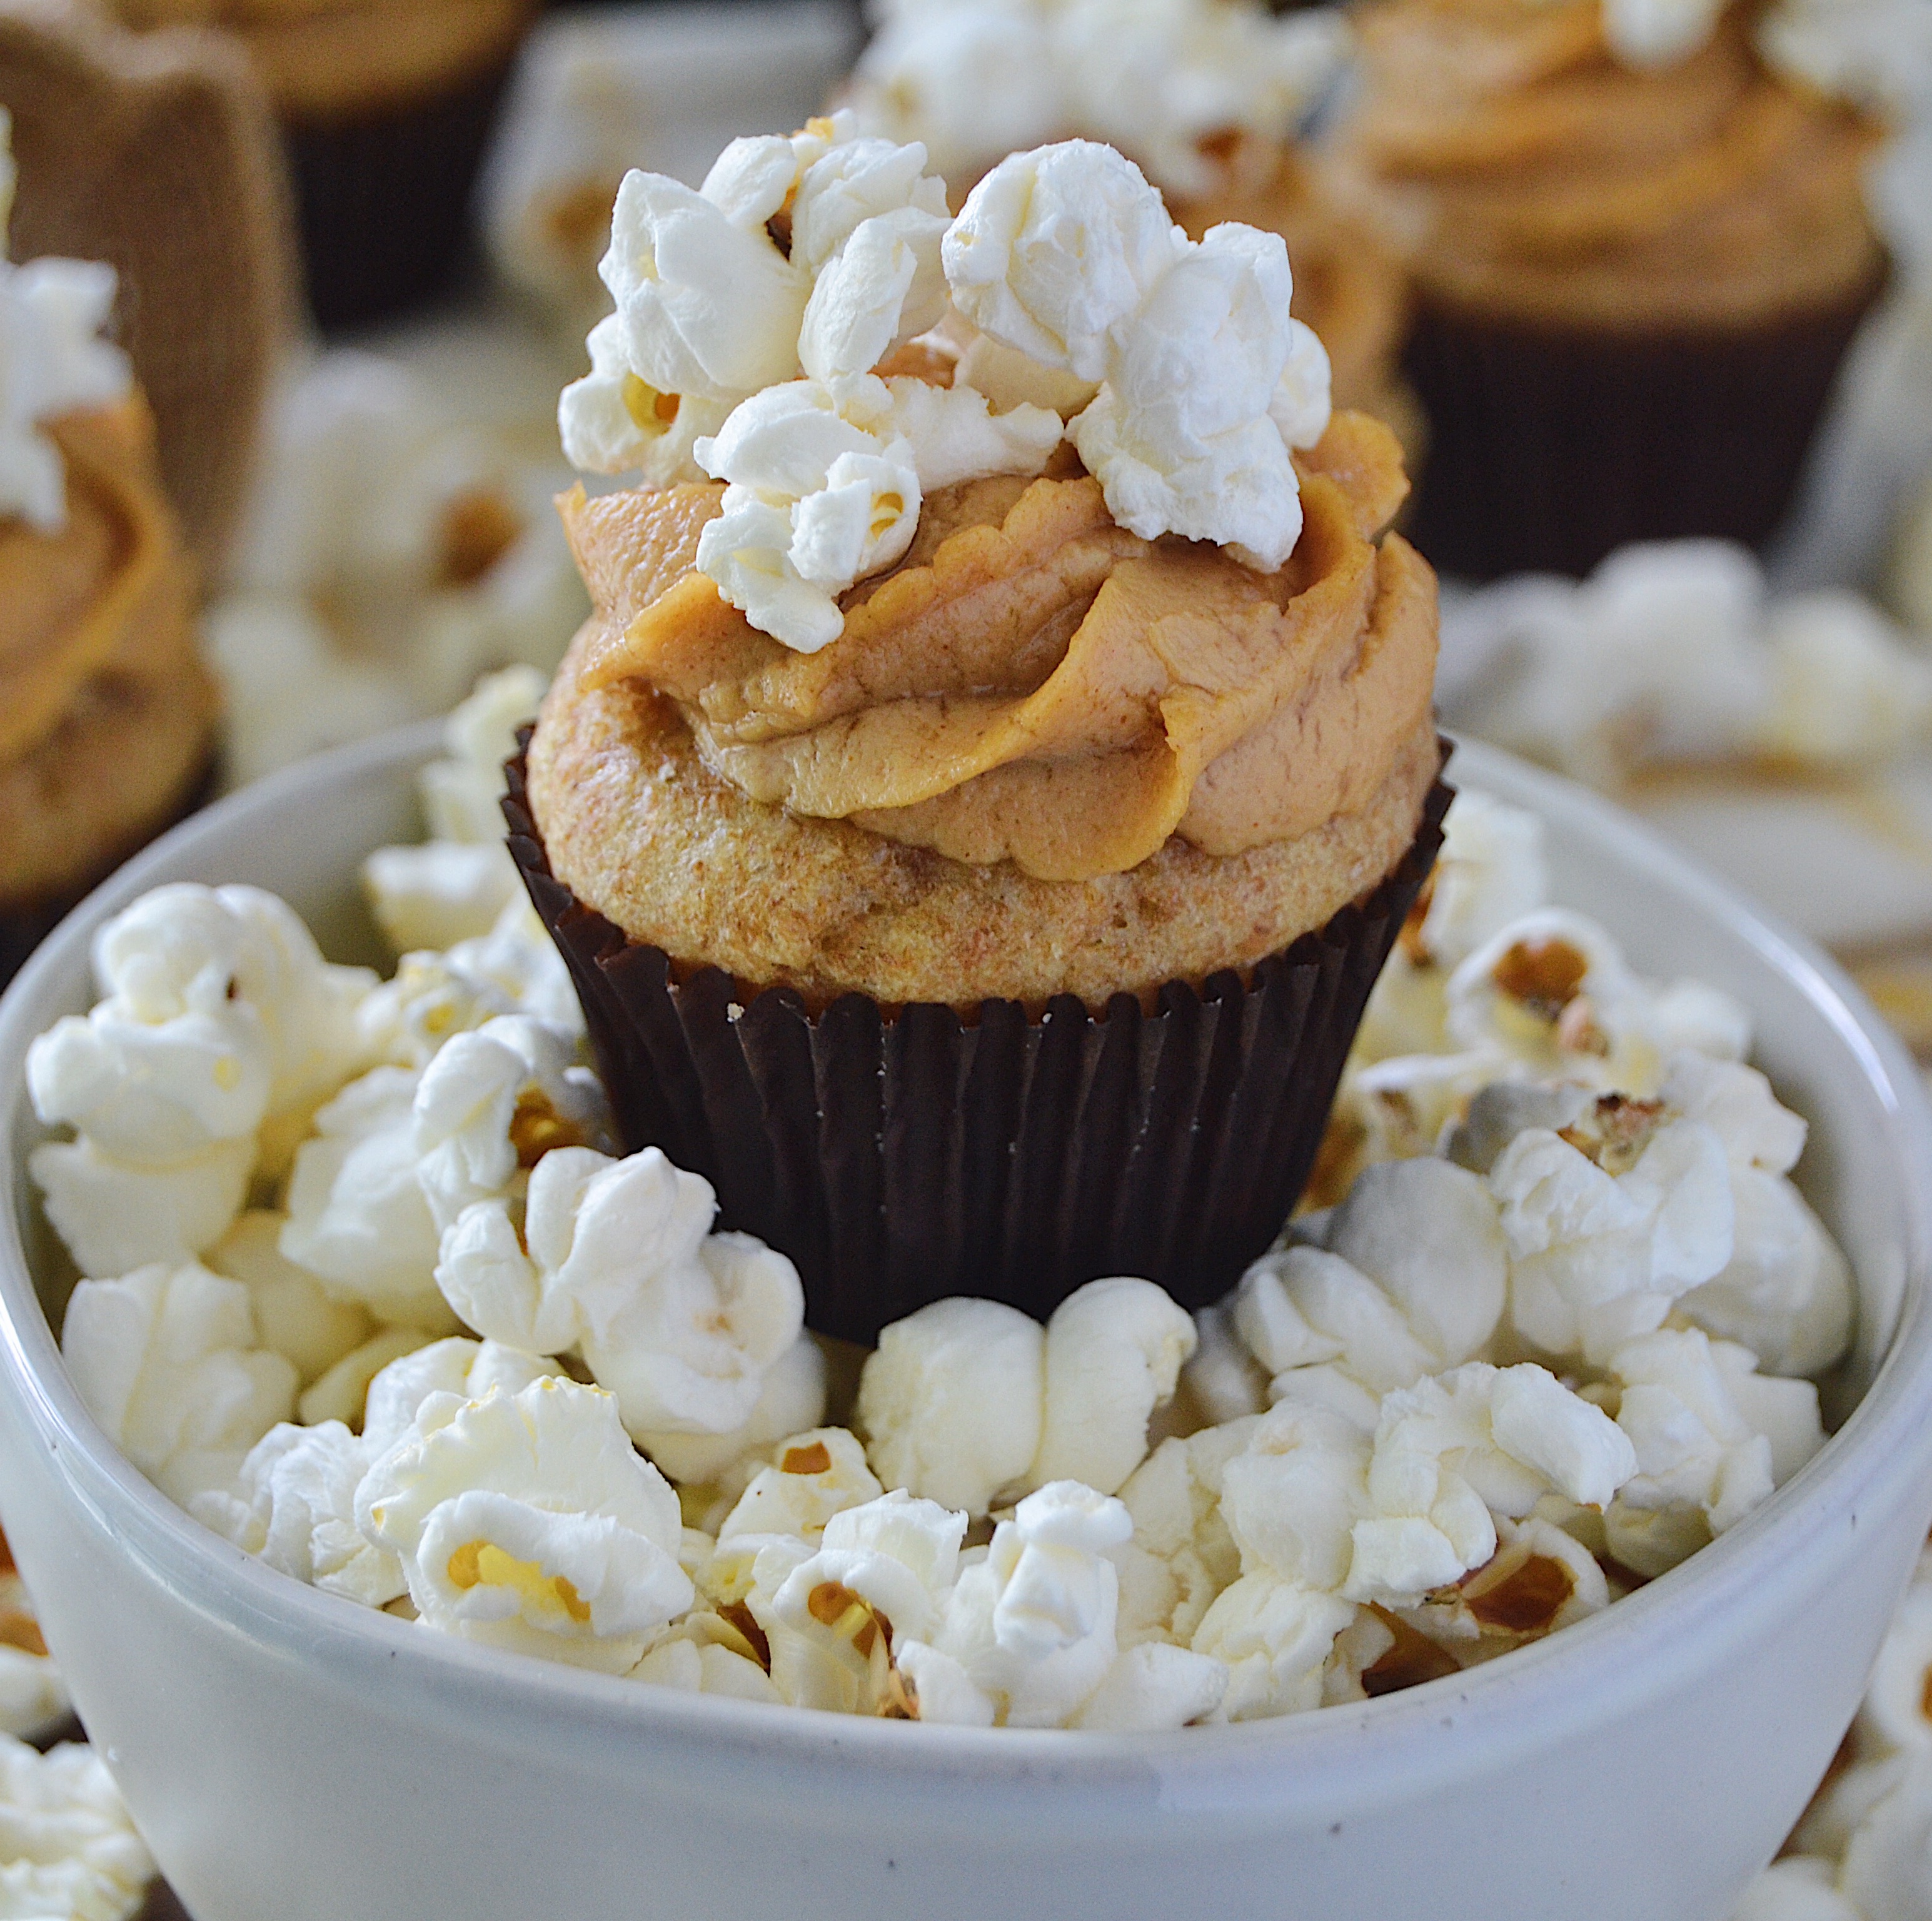 Peanut Butter "Pup-corn" Pupcake recipe for the dog you love to spoil.